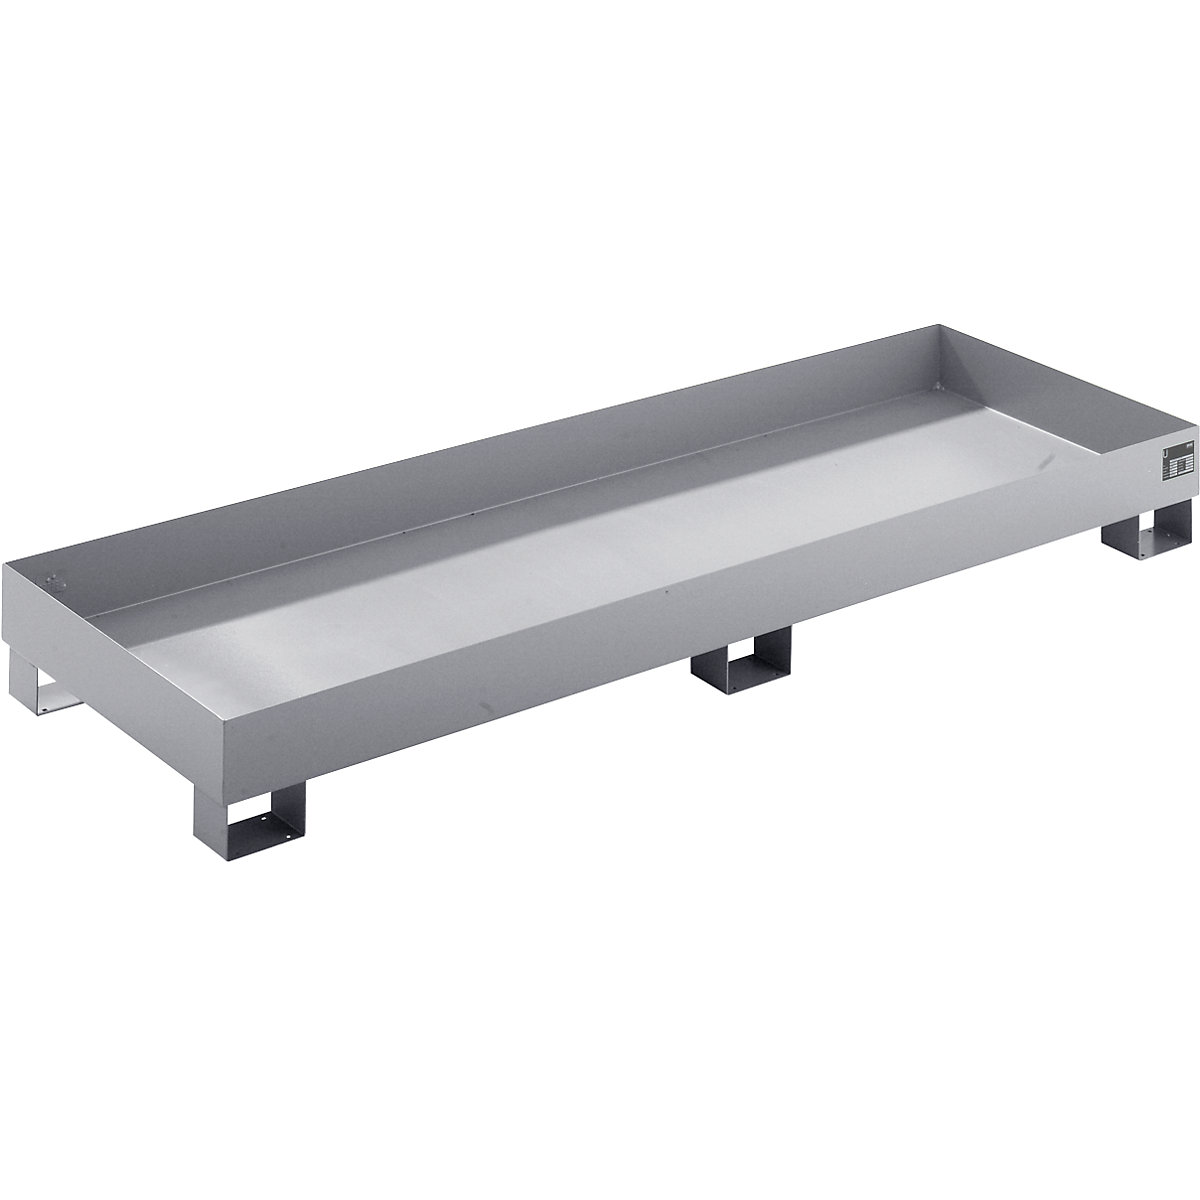 Sump tray made from sheet steel, LxWxH 2400 x 800 x 250 mm, hot dip galvanised-3